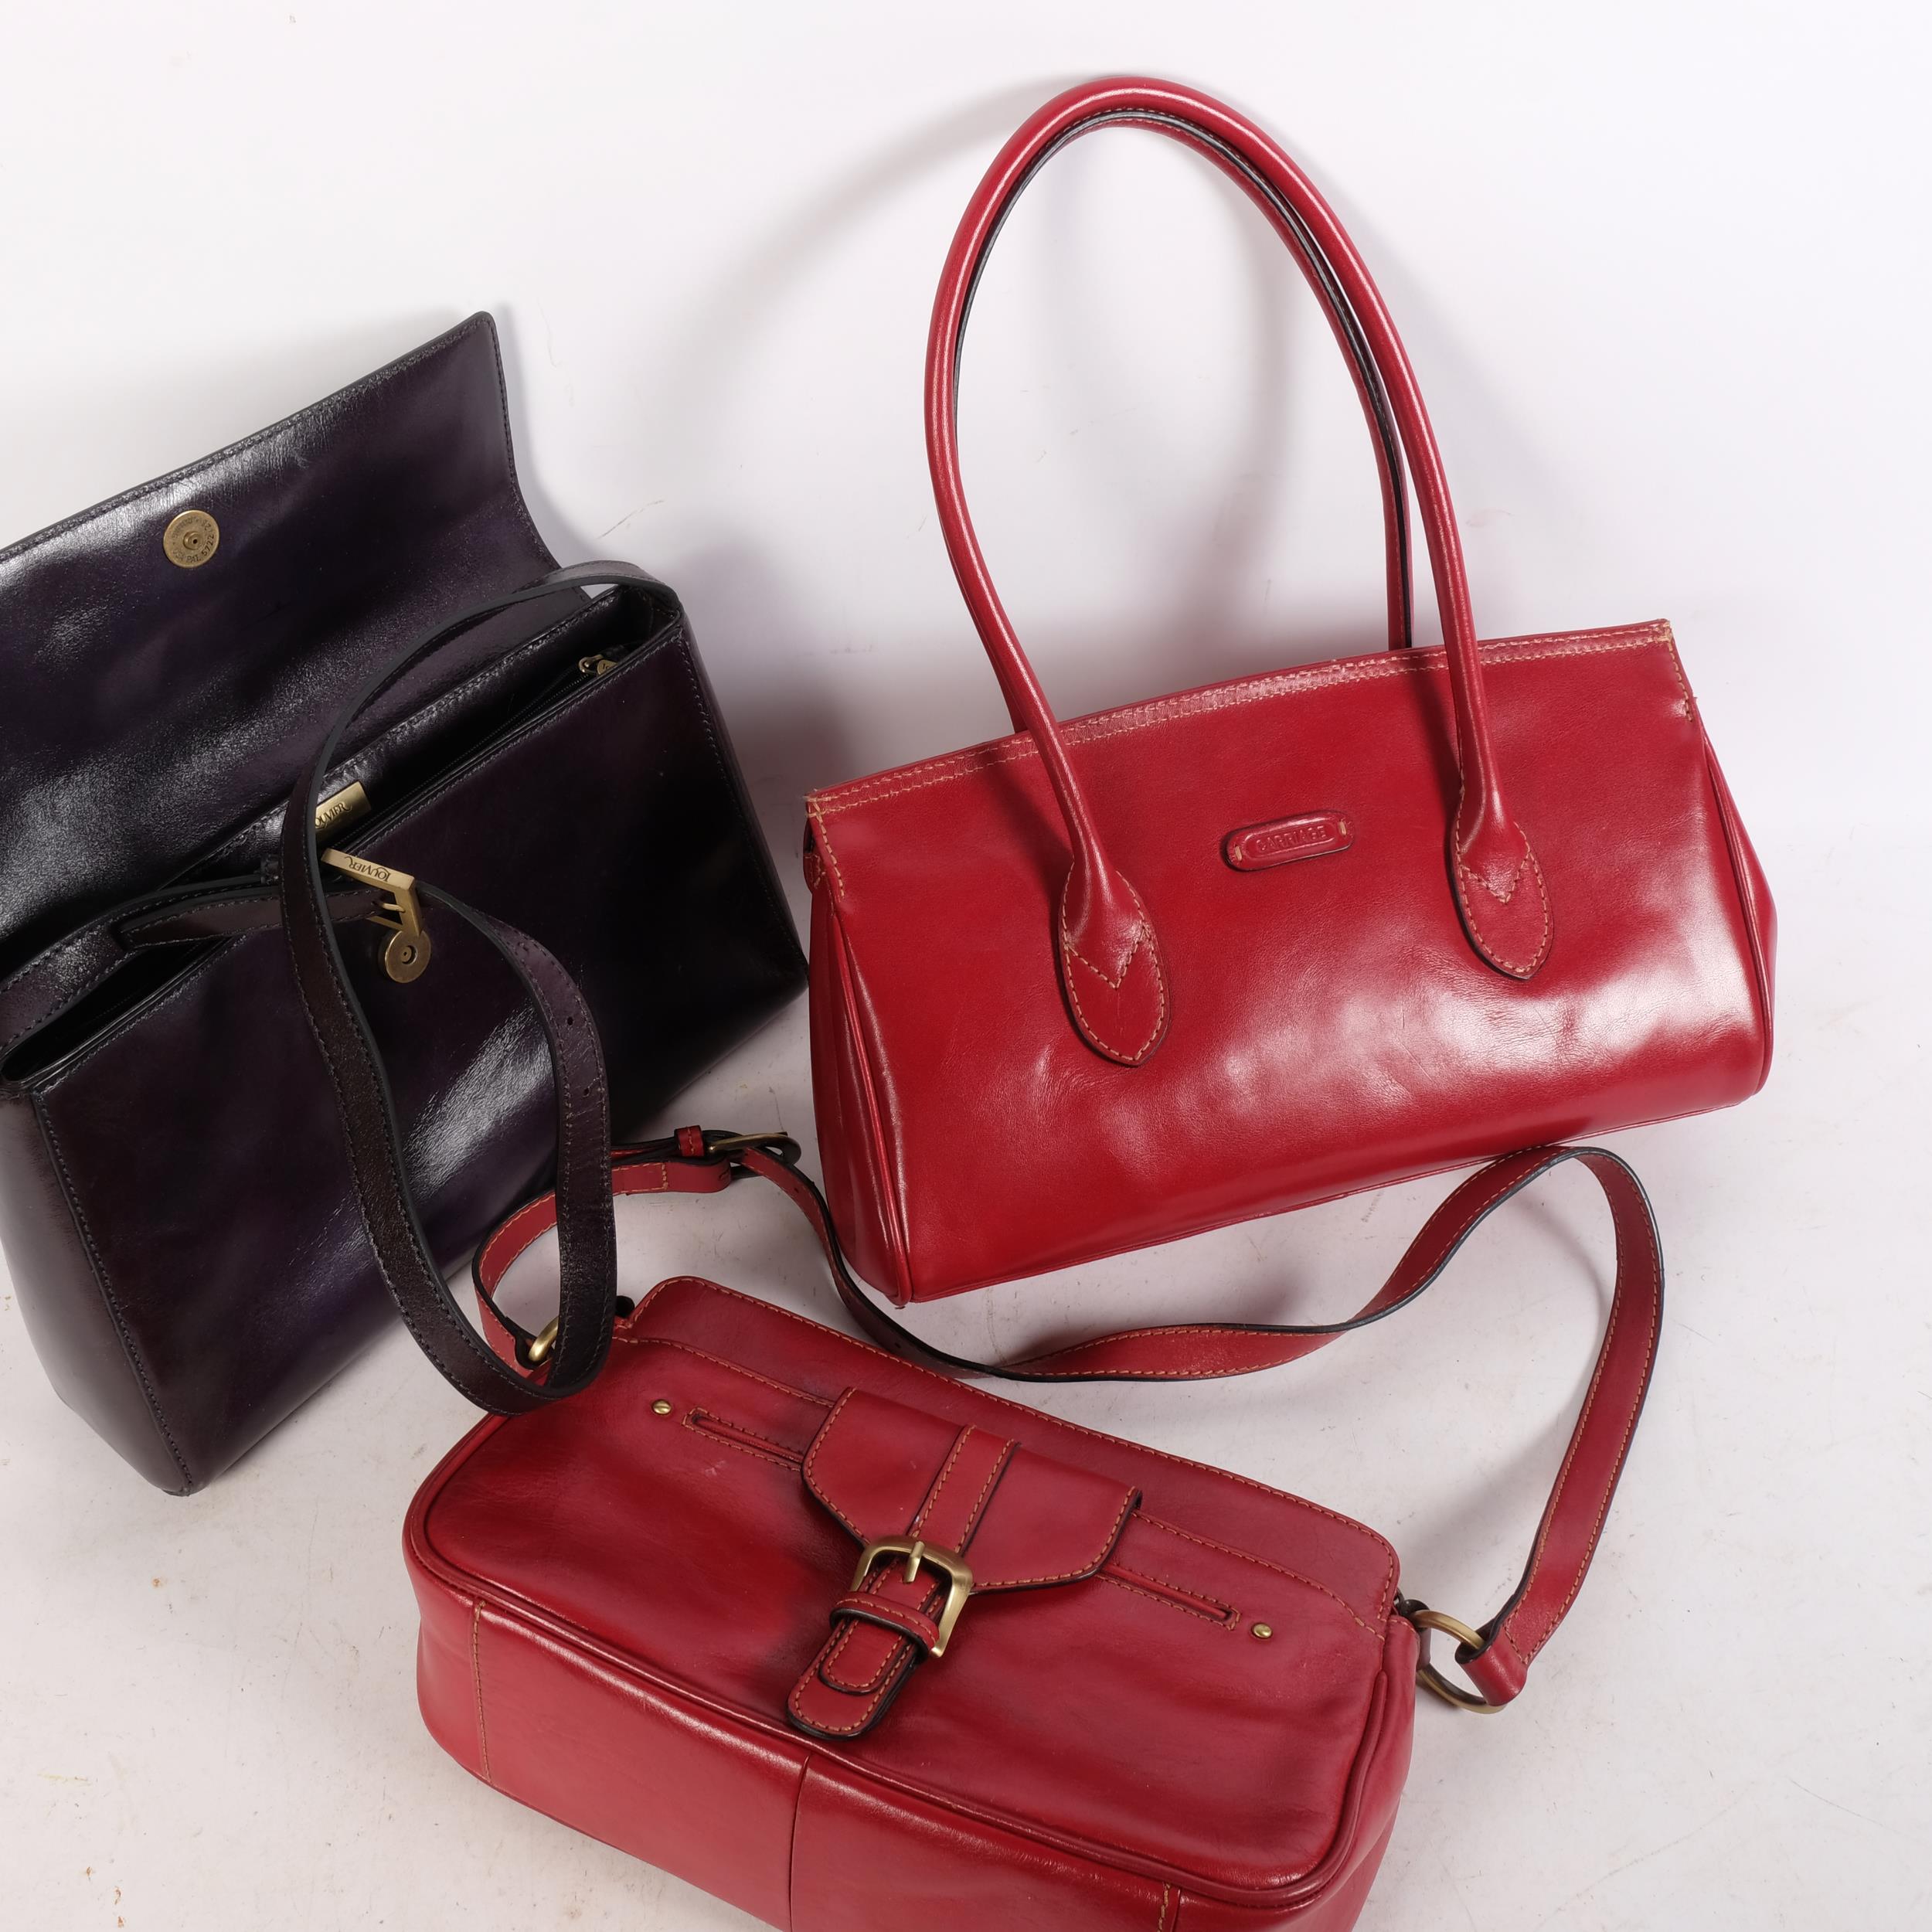 A group of 3 modern lady's handbags, including 2 red Carriage handbags, associated dust covers, - Image 2 of 2